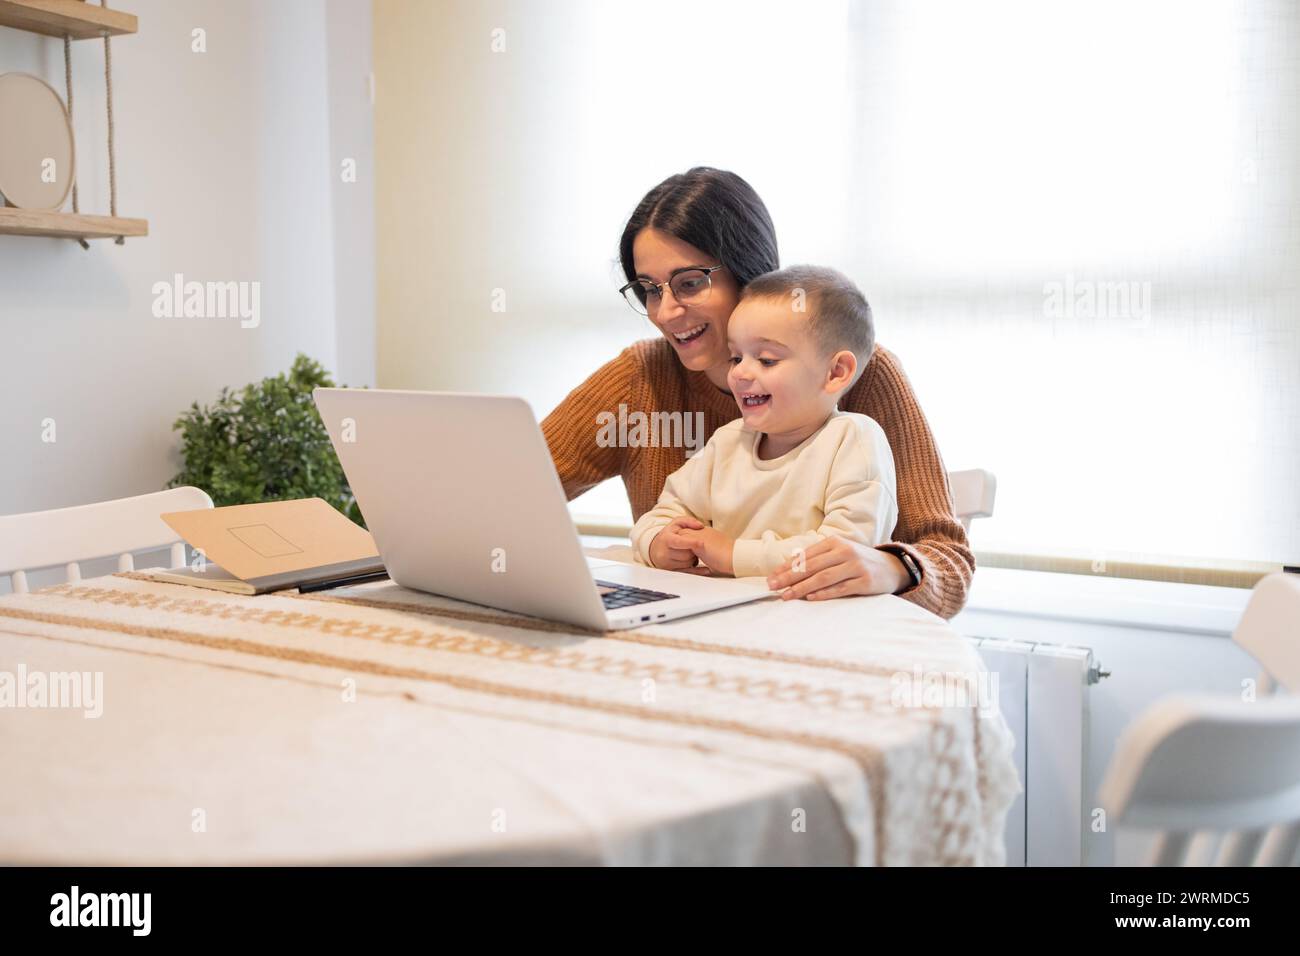 A heartwarming moment as a smiling mother embraces her son while they both engage with content on a laptop at home Stock Photo